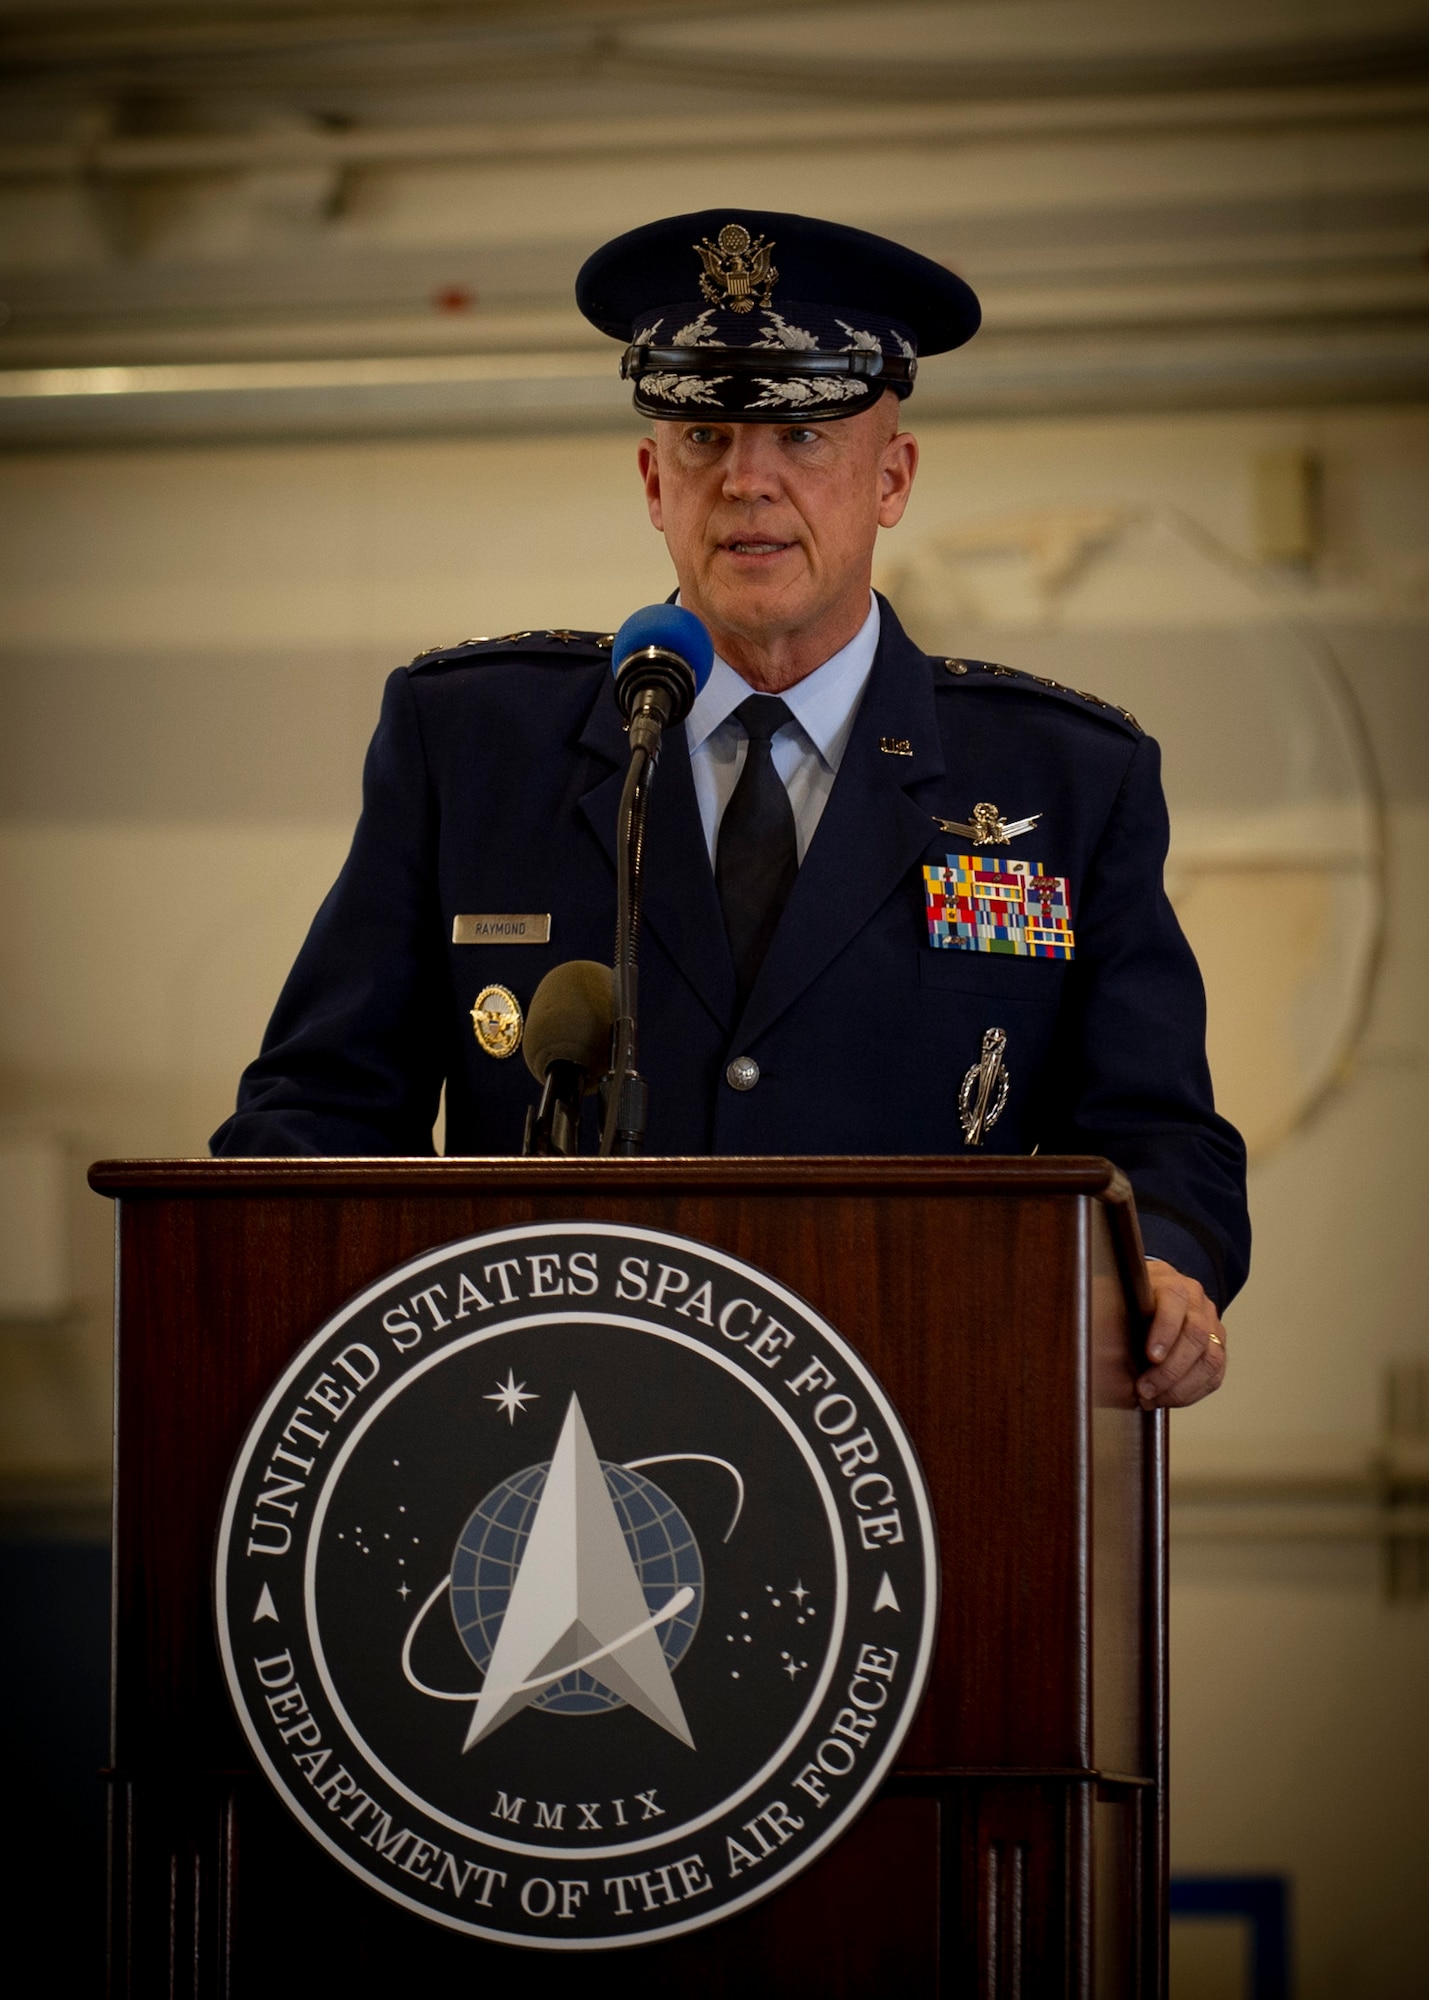 Gen. John W. “Jay” Raymond, U.S. Space Force Chief of Space Operations, shares his vision for the U.S. Space Force’s new Field Command, Space Operations Command (SpOC), during a ceremony at Peterson Air Force Base, Colo., Oct 21, 2020.